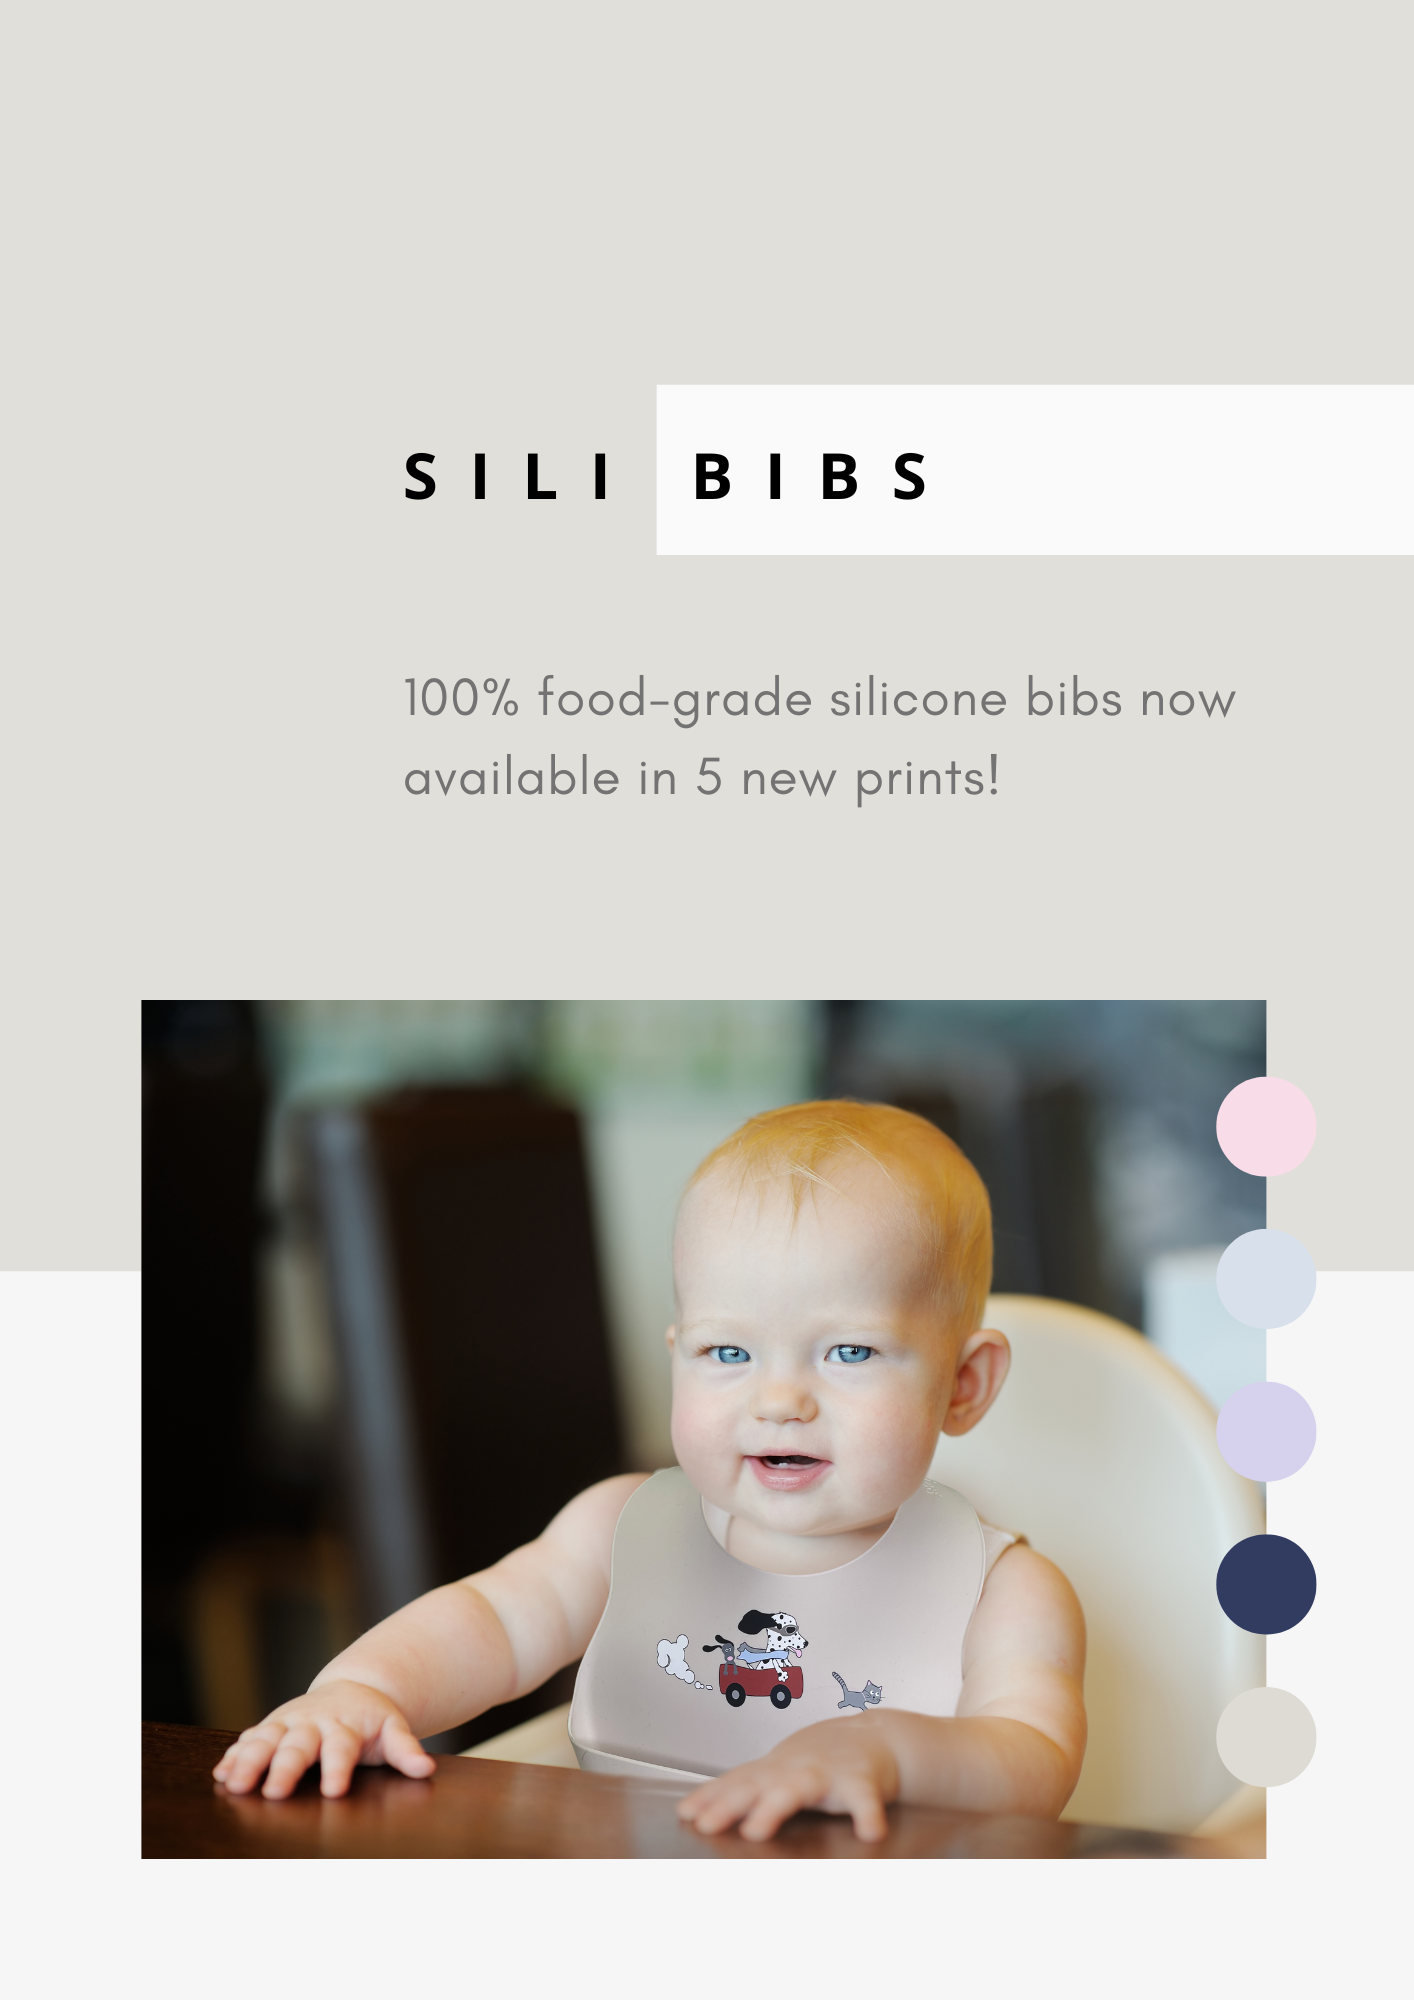 100% food-grade silicone bibs now available in 5 new prints!